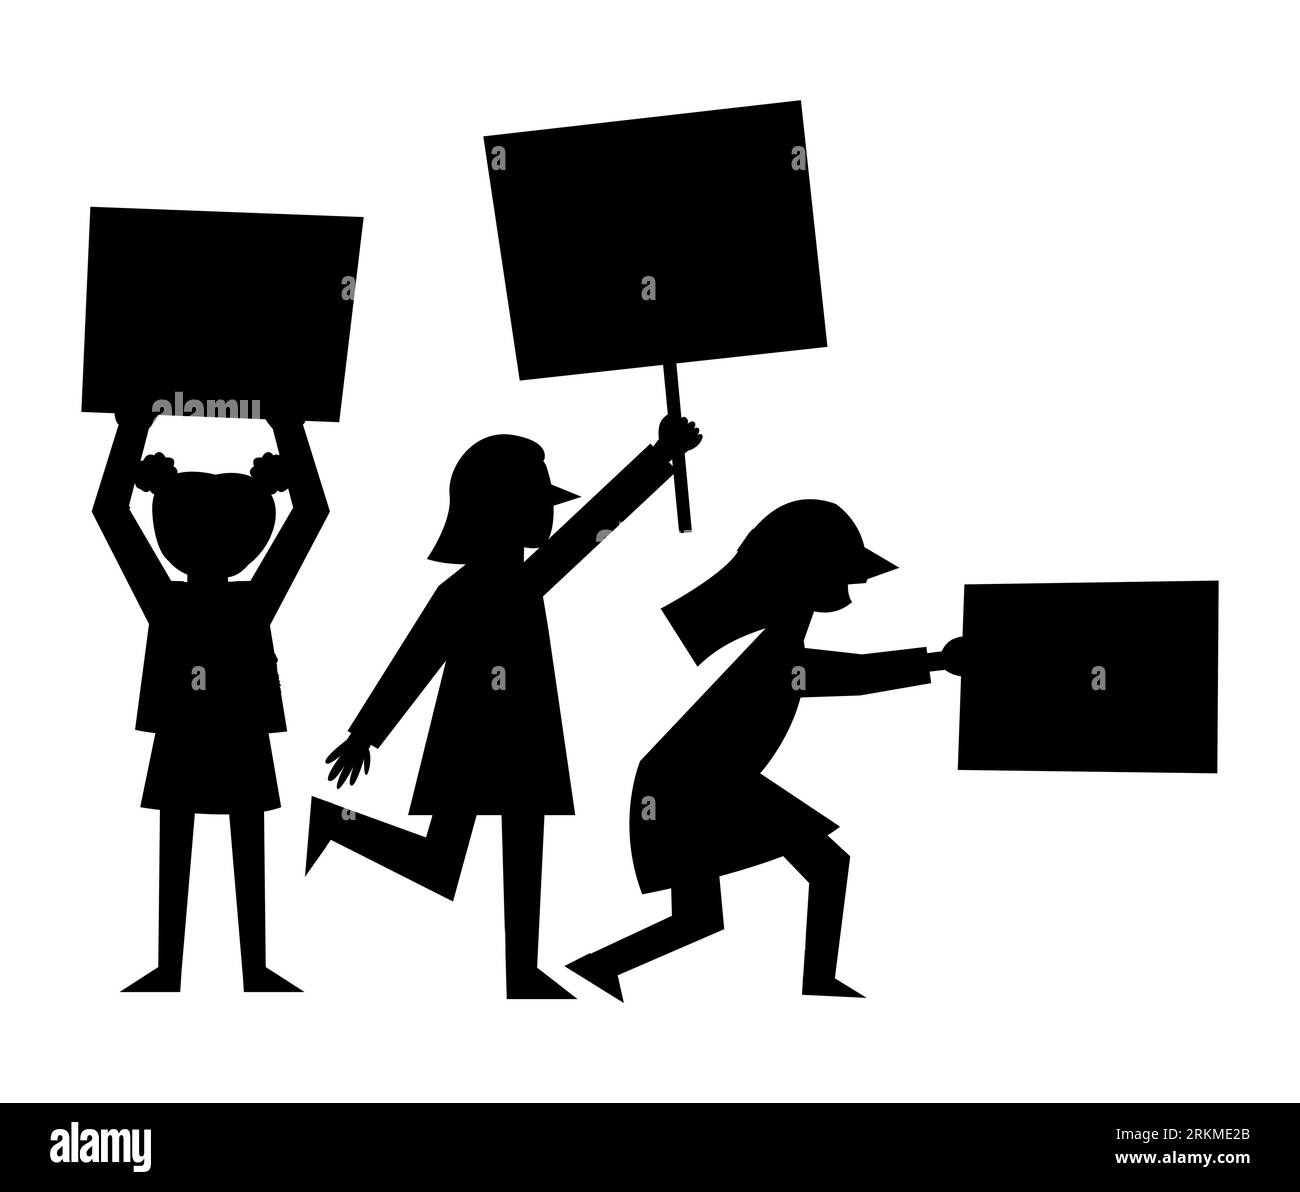 Black silhouette of women's rights protest: silhouette vector illustration, vector illustration isolated on white background, cartoon characters Stock Vector